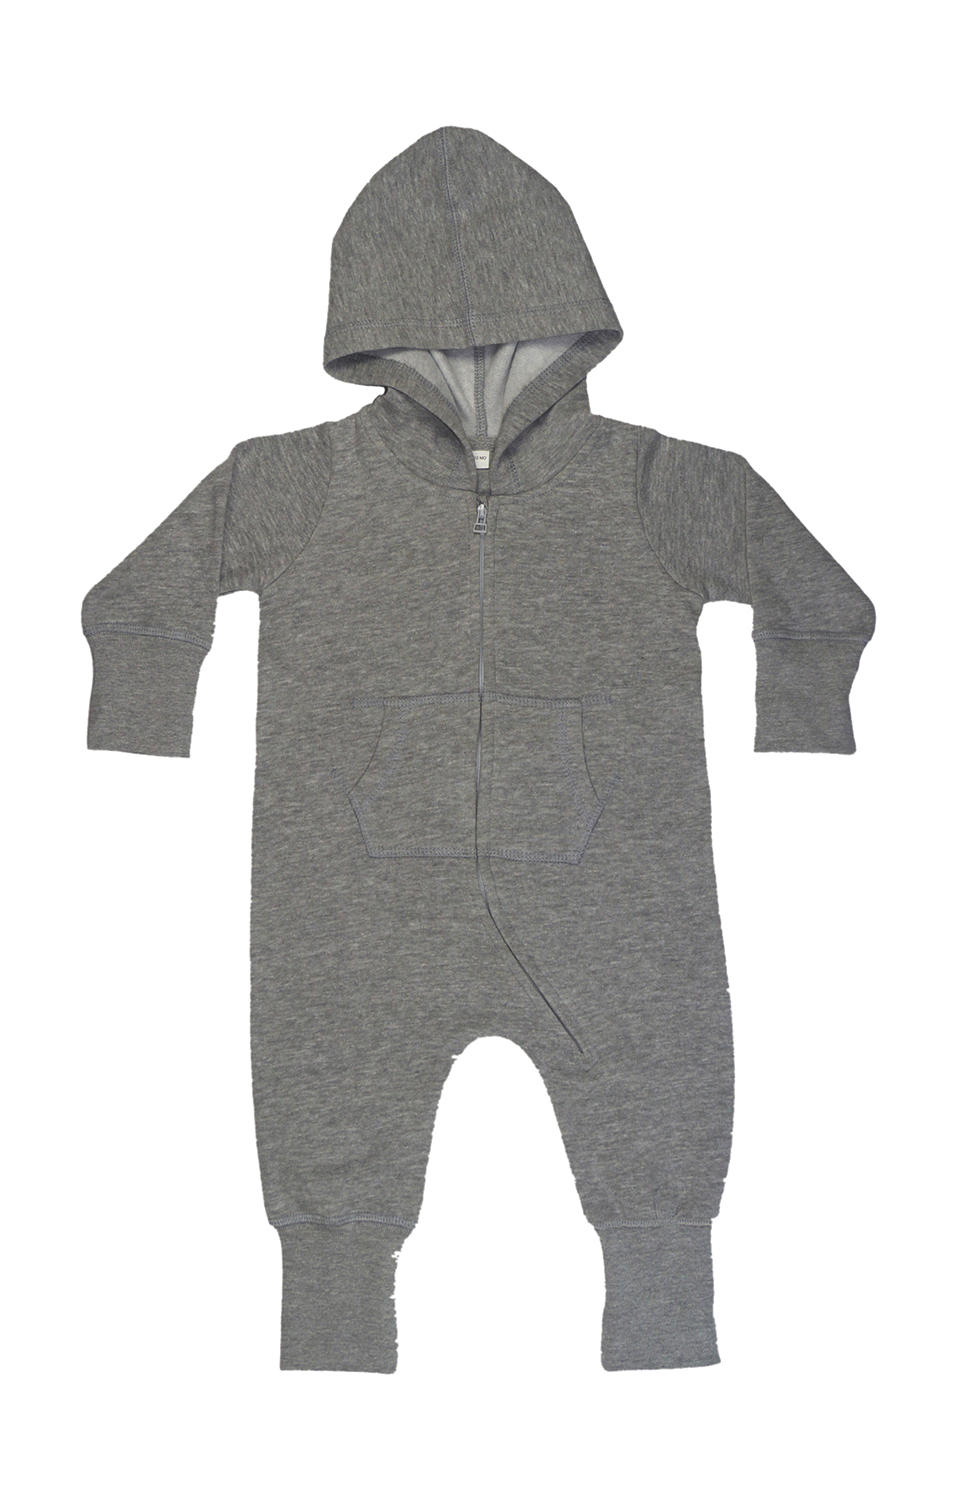  Baby All-in-One in Farbe Washed Grey Melange